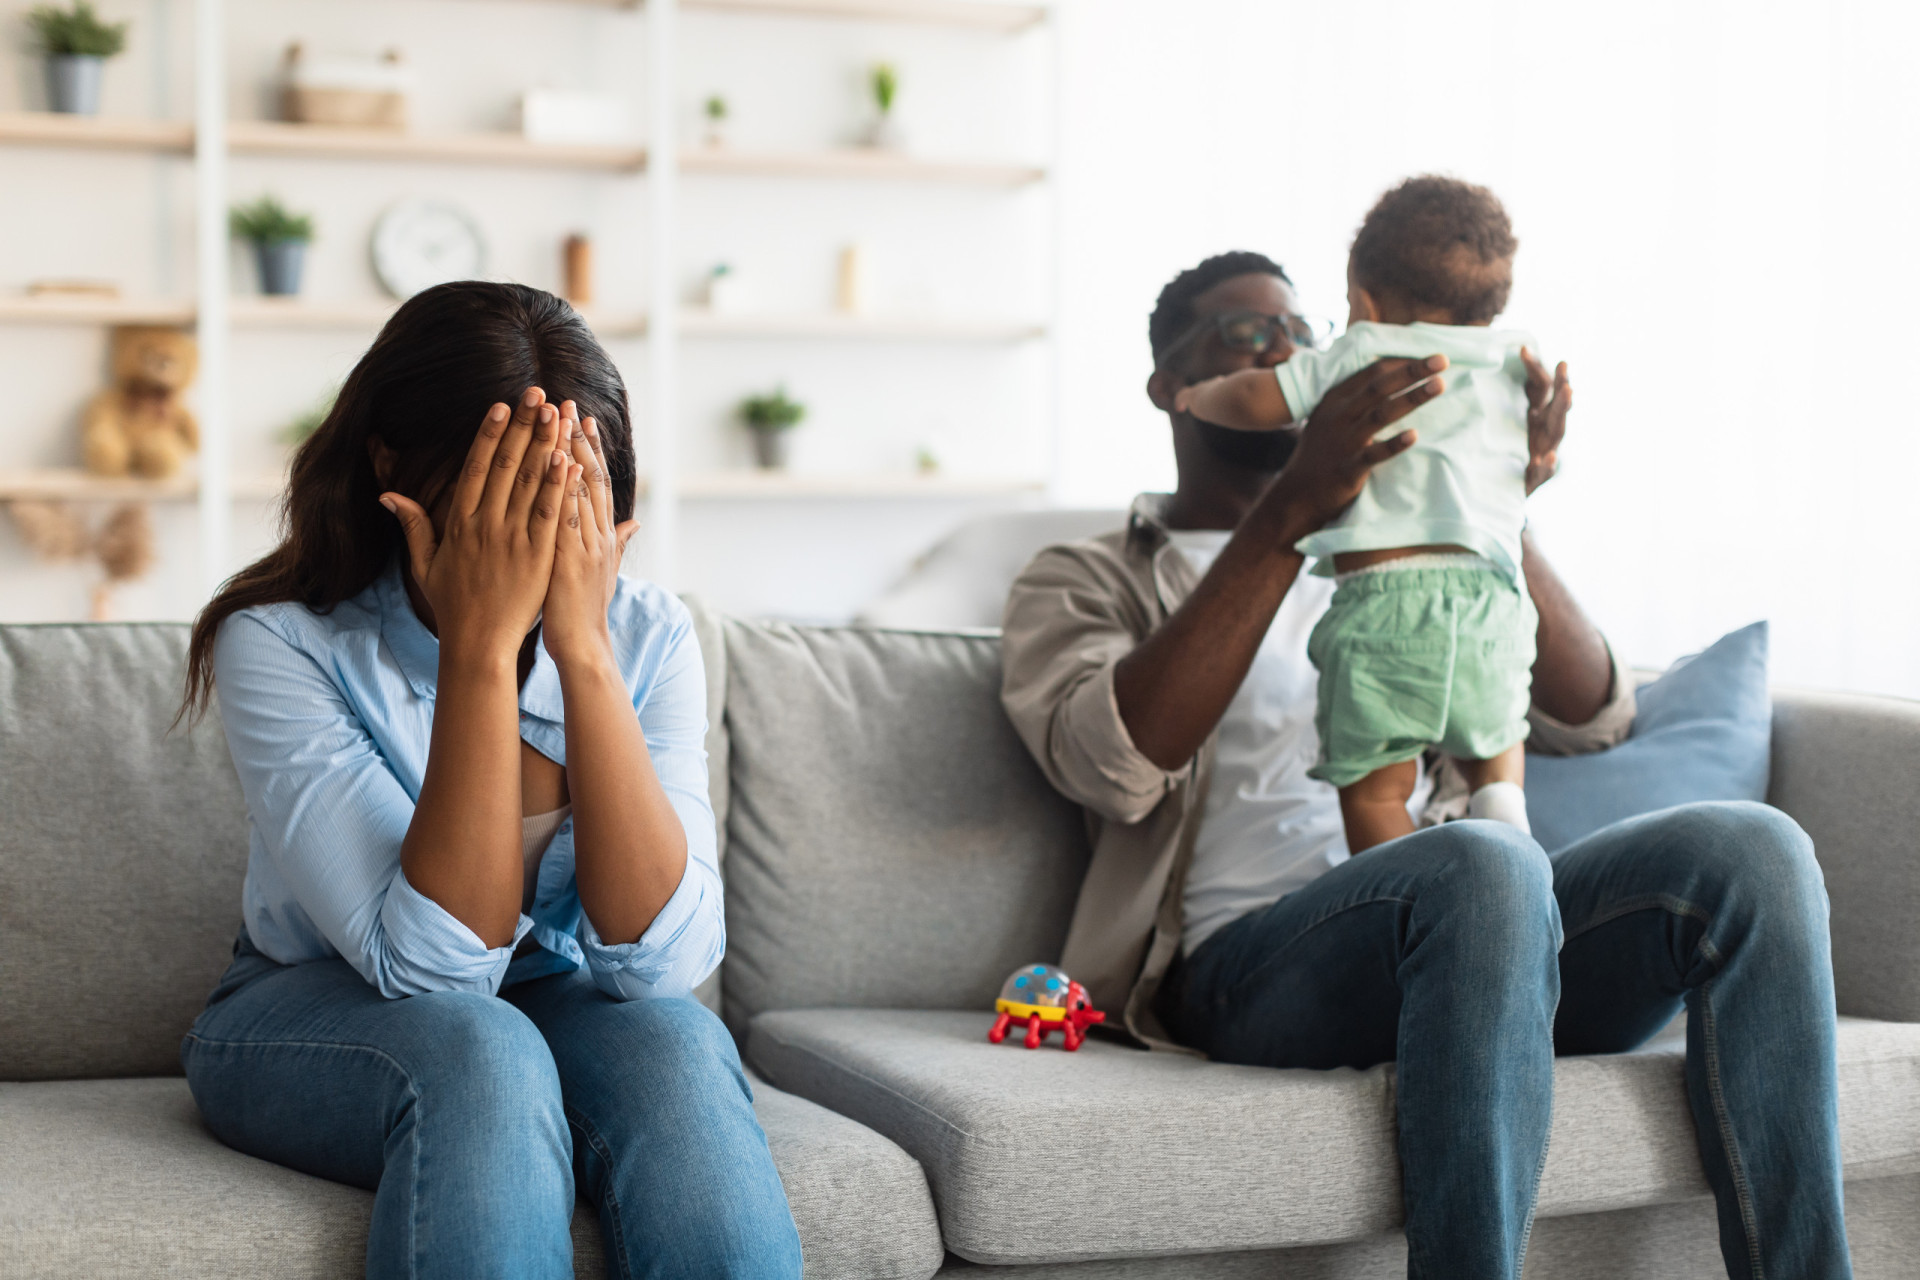 <p>The feelings of guilt seem to affect primarily moms, not dads. Why is this so? It's commonly called mom guilt because in Western culture it's often assumed that moms bear the burden of juggling work life and parenting. It's seen as a "natural" occurrence, a traditional gender-role expectation.</p><p><a href="https://www.msn.com/en-us/community/channel/vid-7xx8mnucu55yw63we9va2gwr7uihbxwc68fxqp25x6tg4ftibpra?cvid=94631541bc0f4f89bfd59158d696ad7e">Follow us and access great exclusive content every day</a></p>